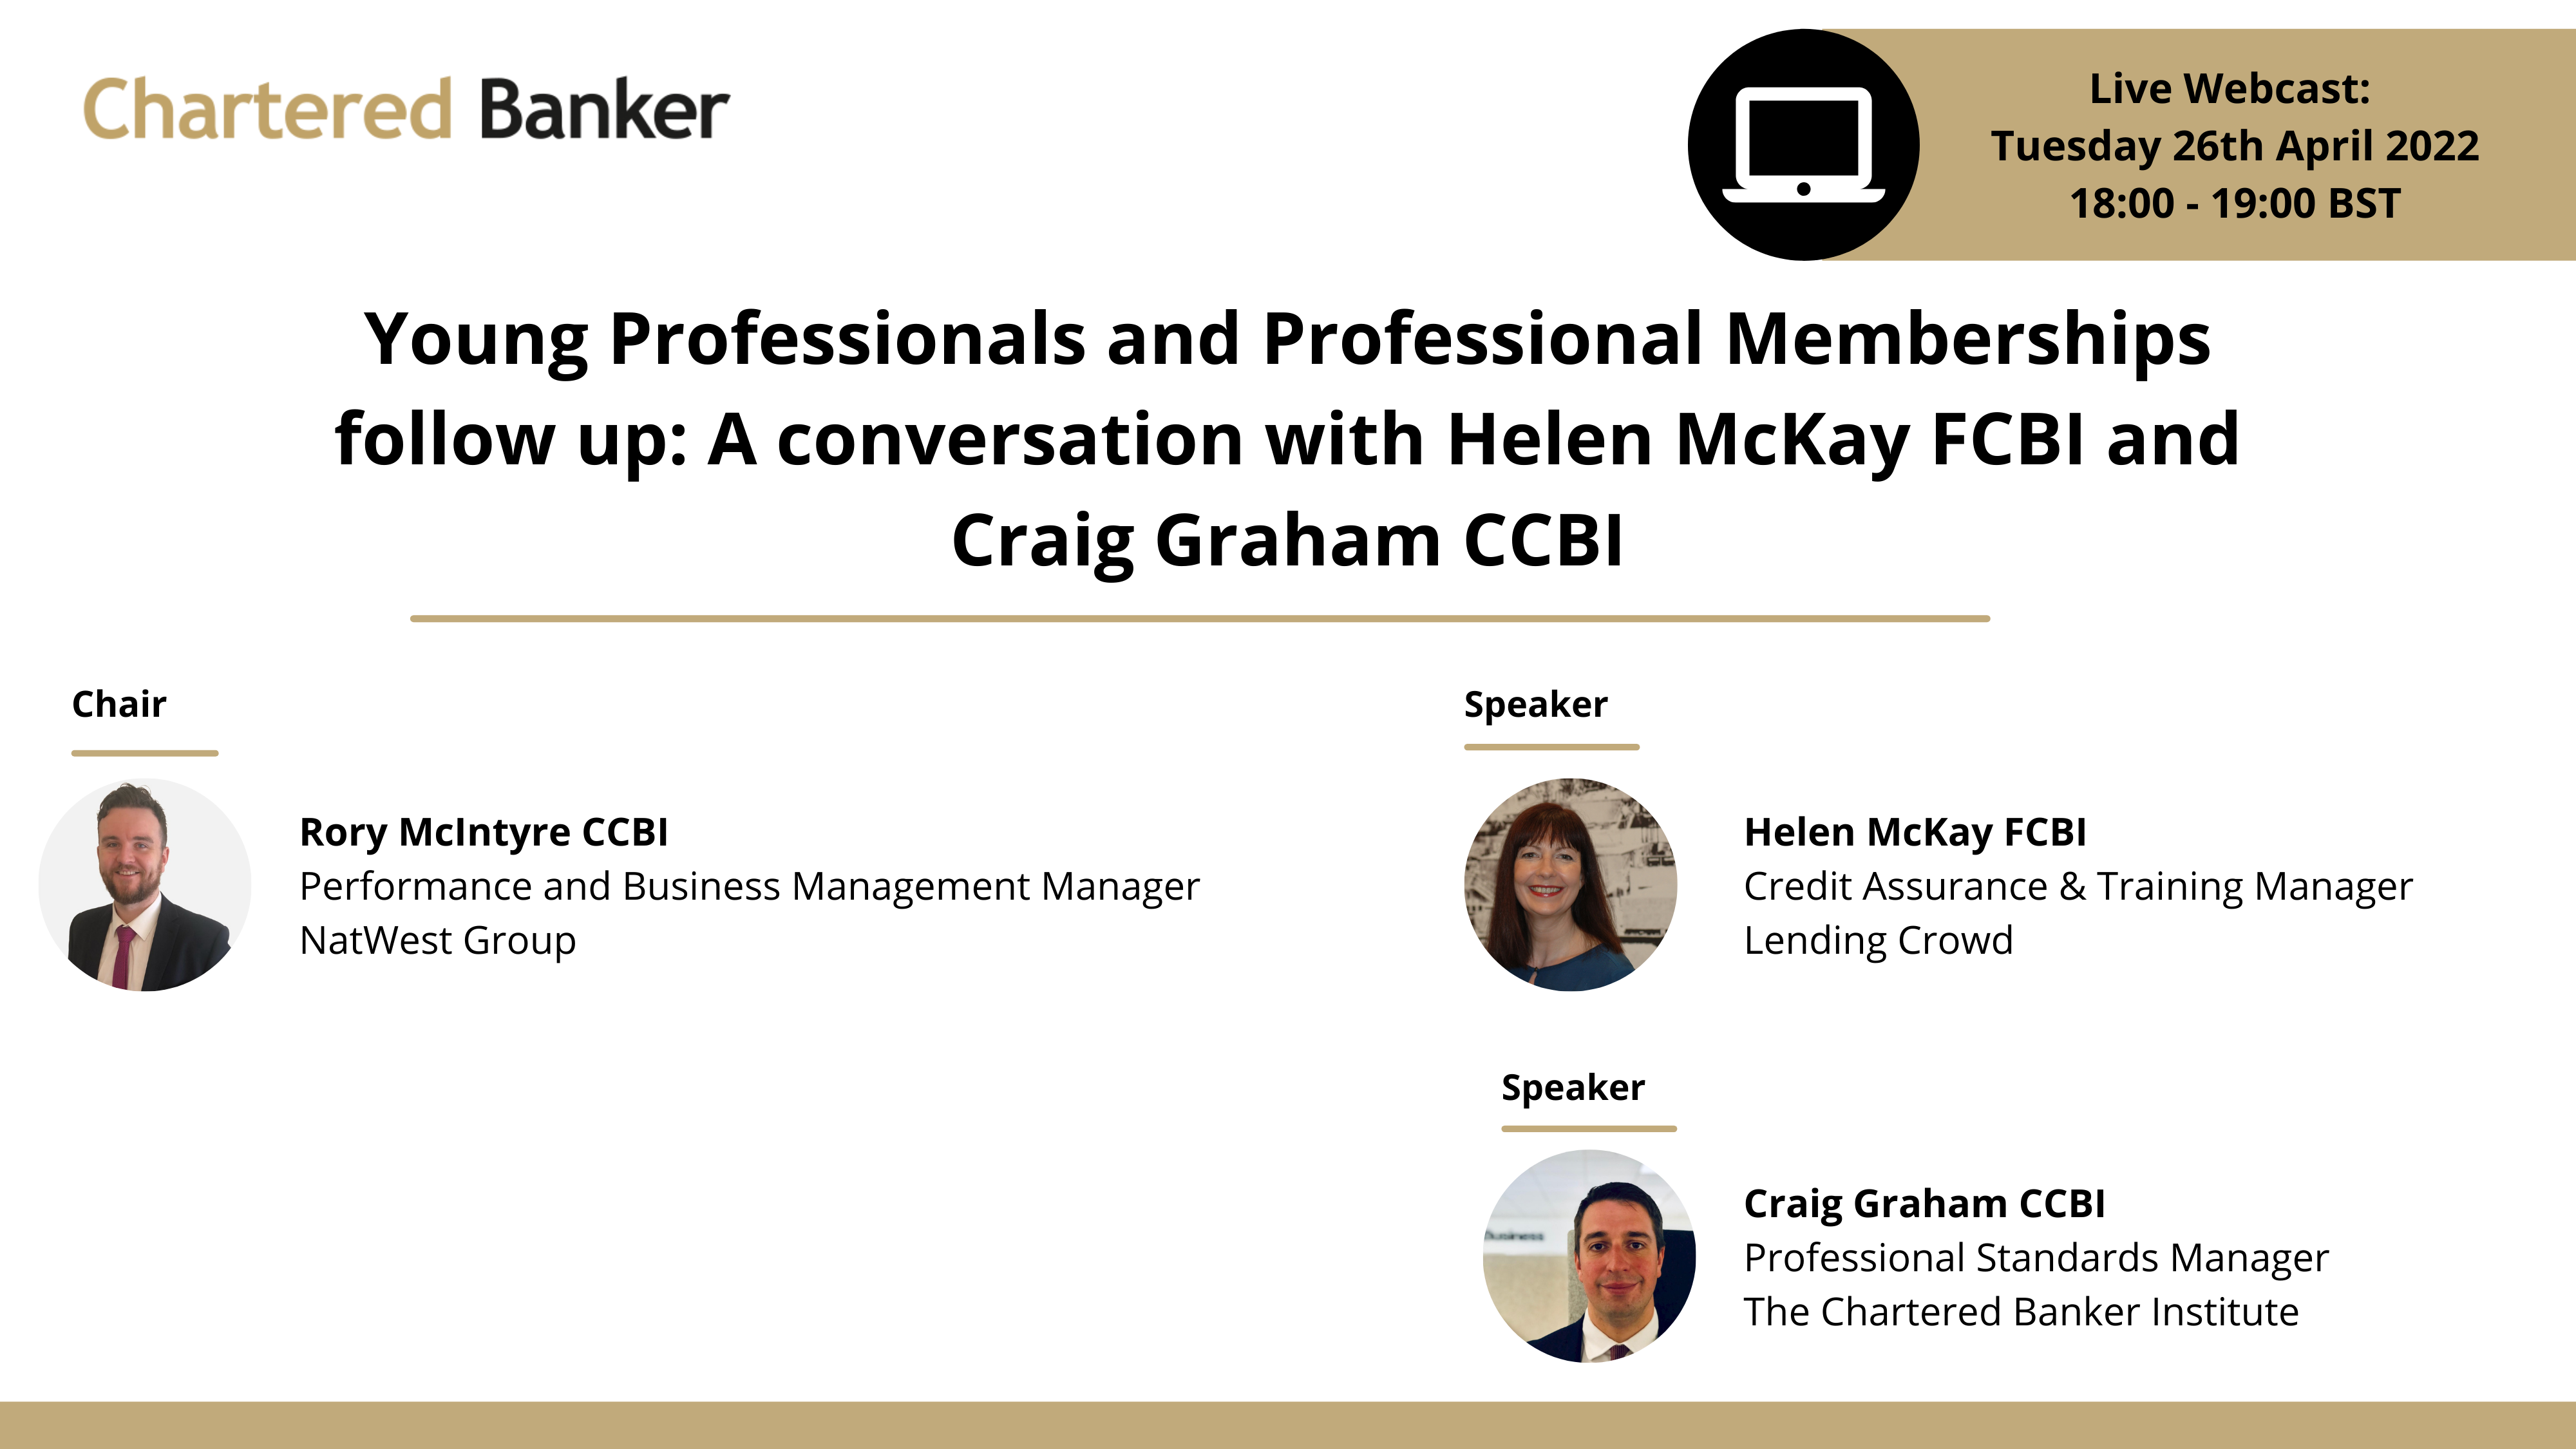 Young Professionals & Professional Memberships: A conversation with Helen McKay & Craig Graham CCBI